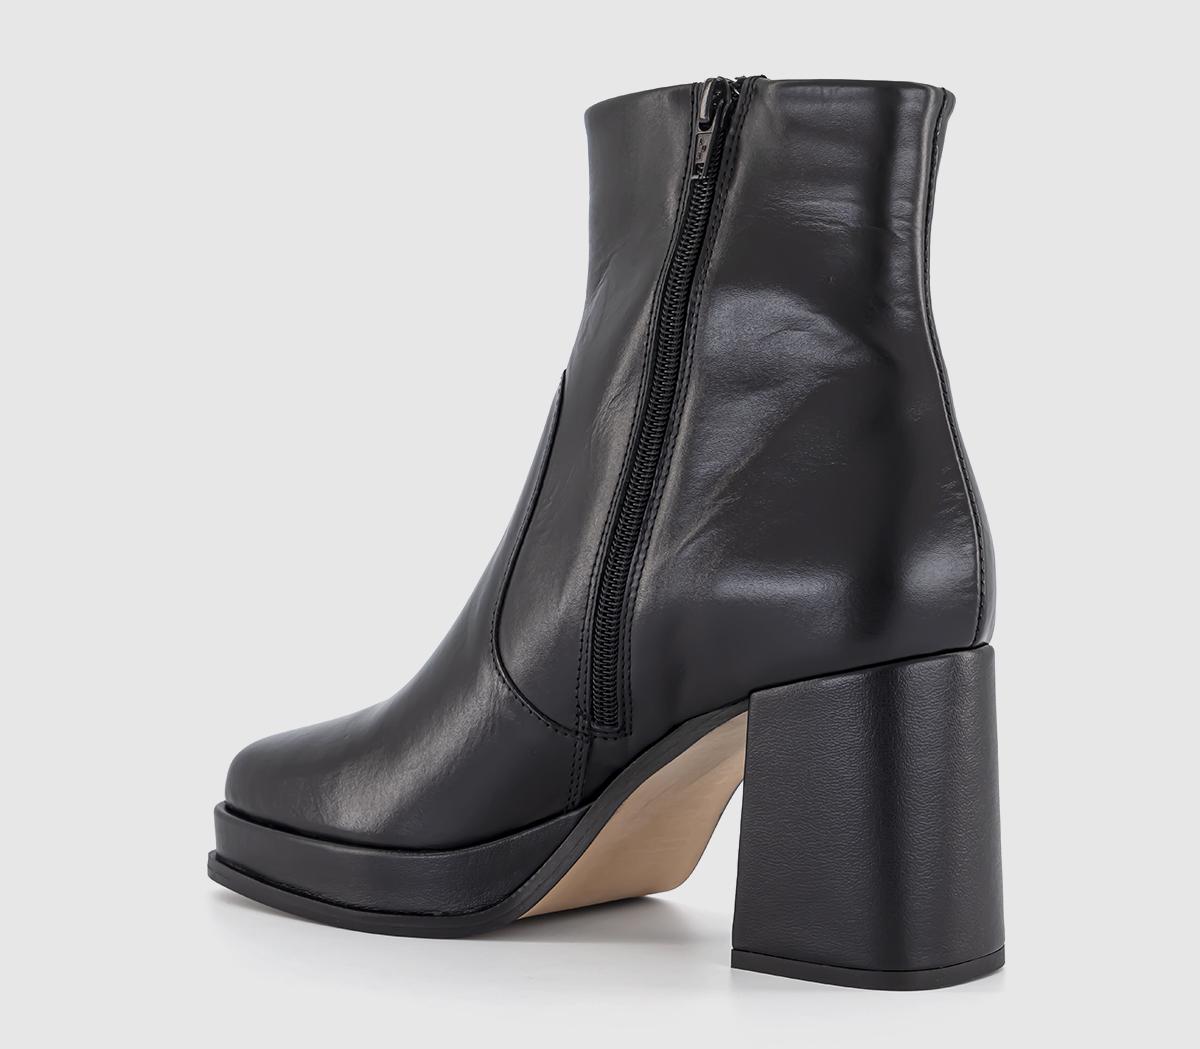 OFFICE Apply Covered Platform Block Heel Ankle Boots Black Leather ...